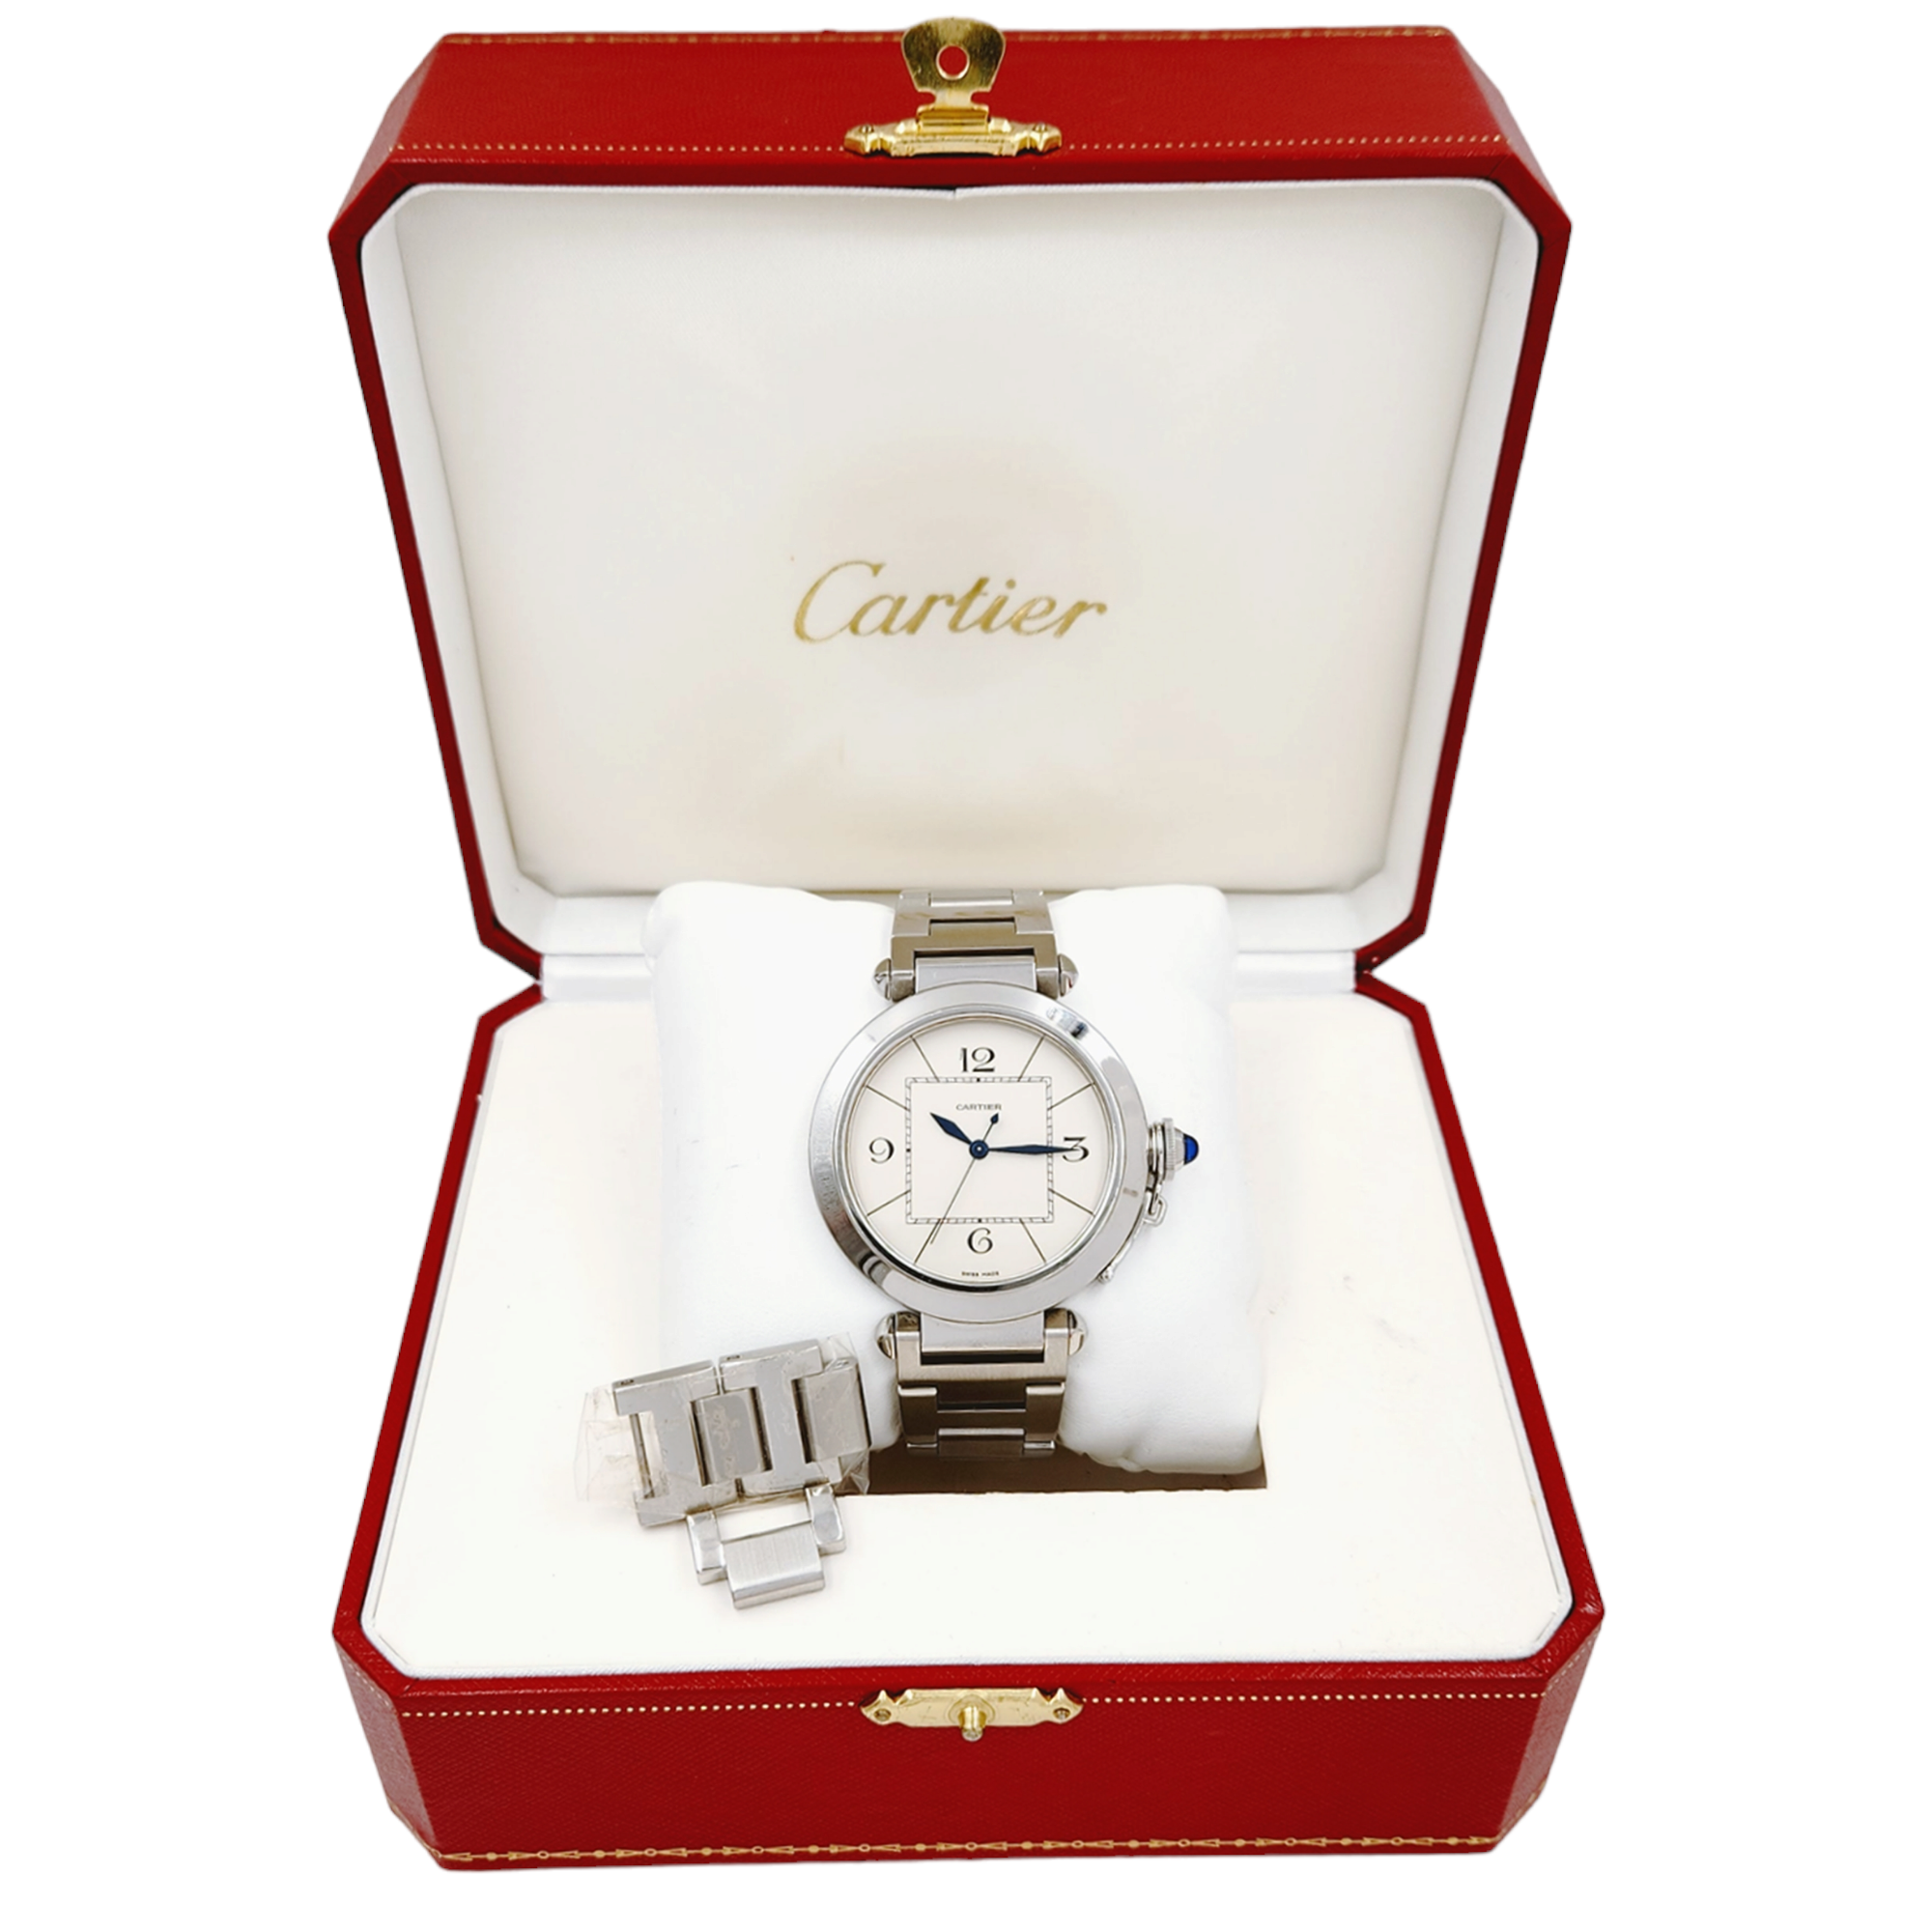 Men's 42mm Cartier Pasha Automatic Watch with Egg-Shell Dial in Matte Stainless Steel. (Pre-Owned W31072M7)